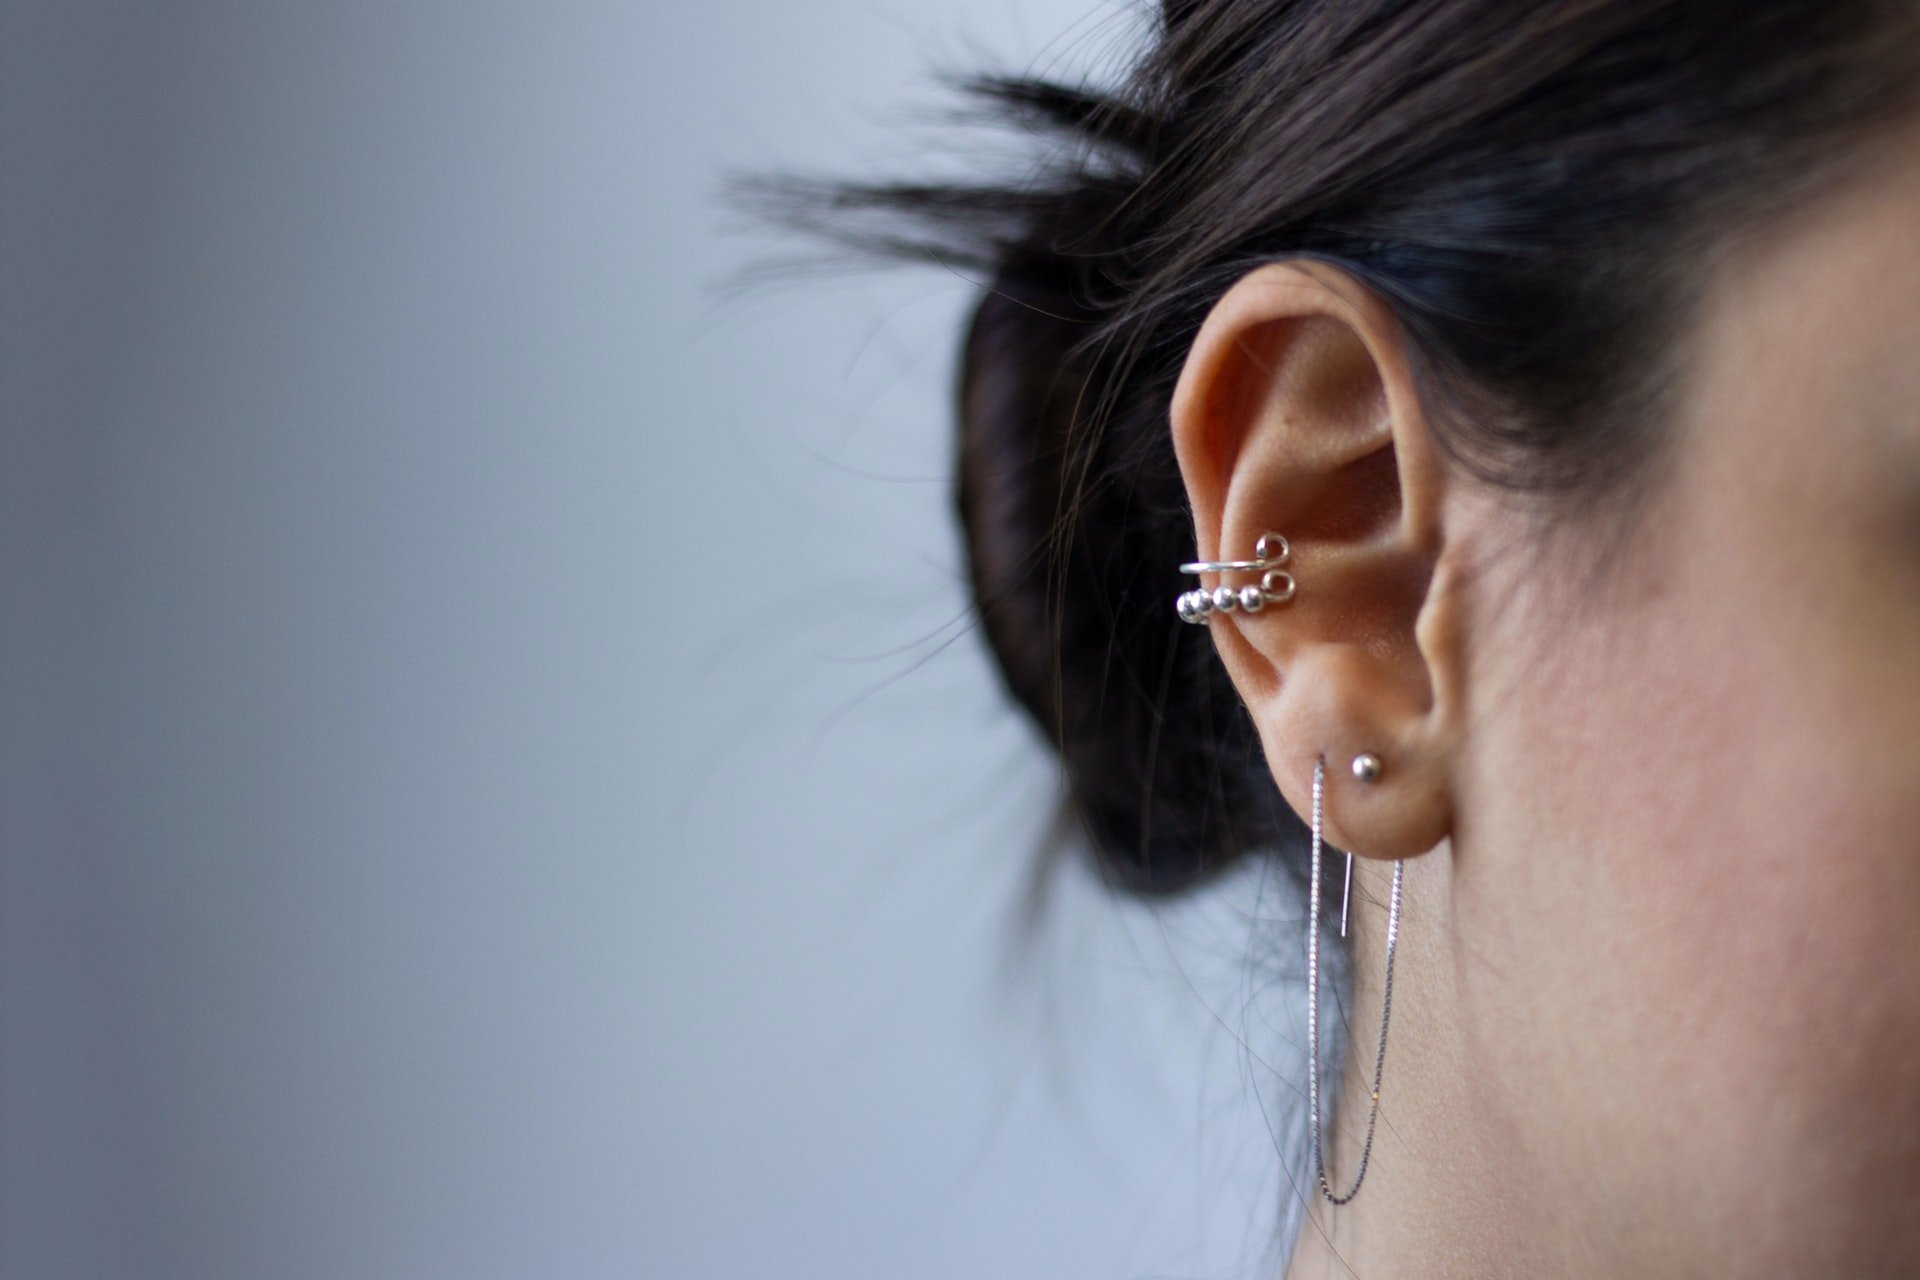 Her mother-in-law called her hypocritical because she had so many piercings | Source: Unsplash